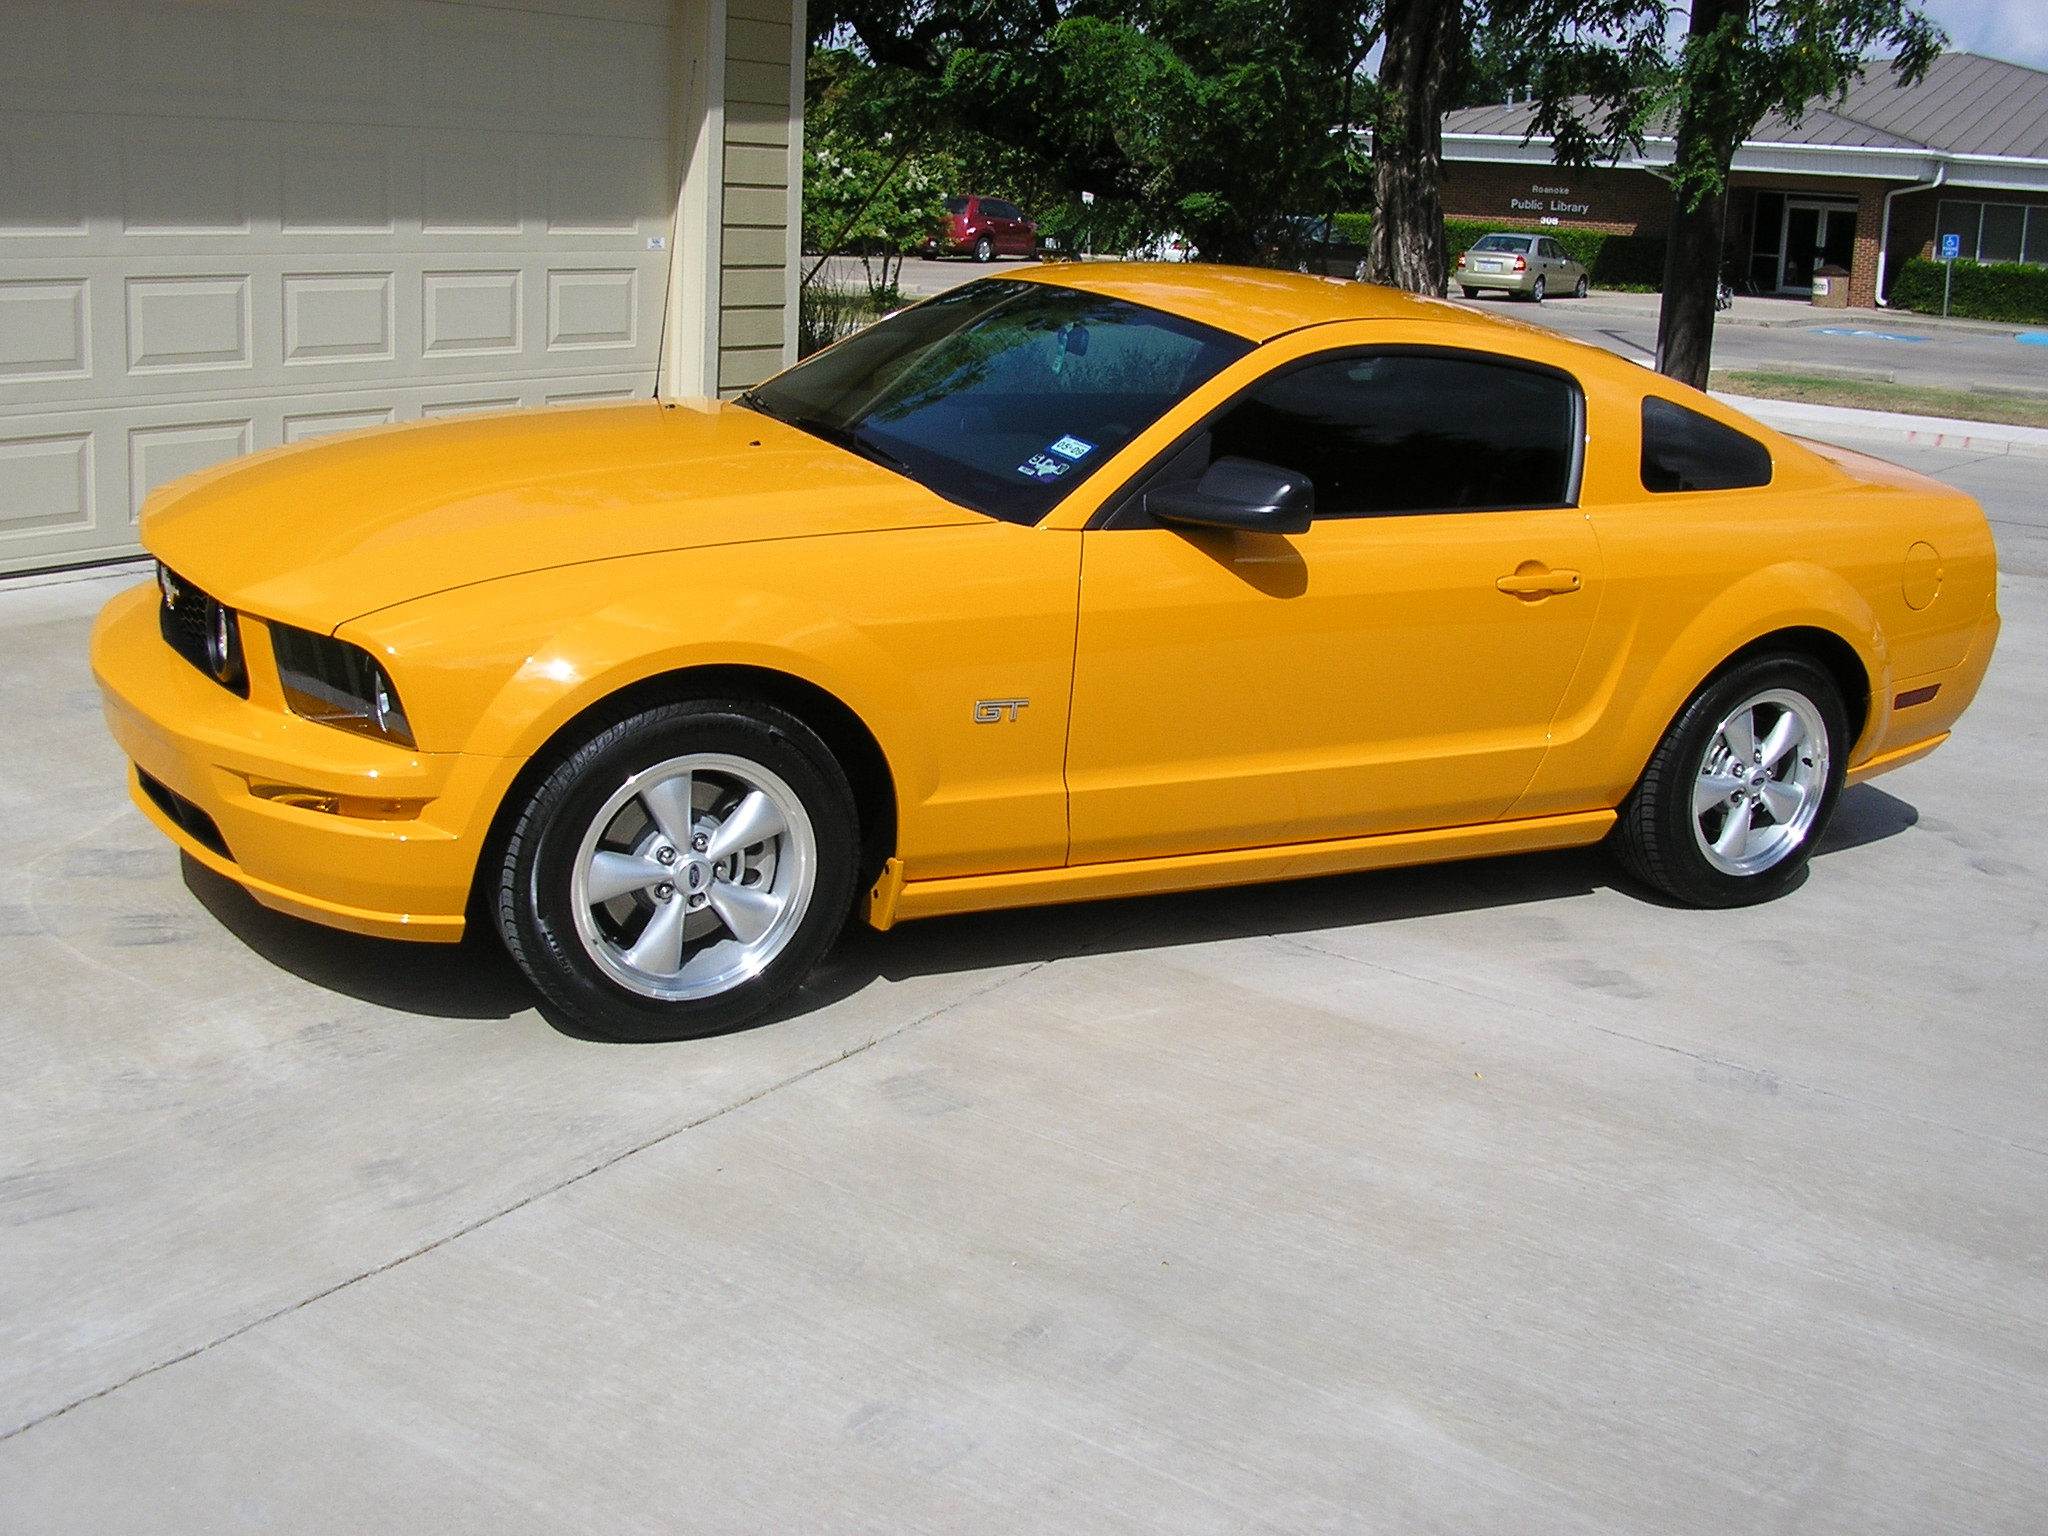 2008 Ford mustang gt quarter mile #6